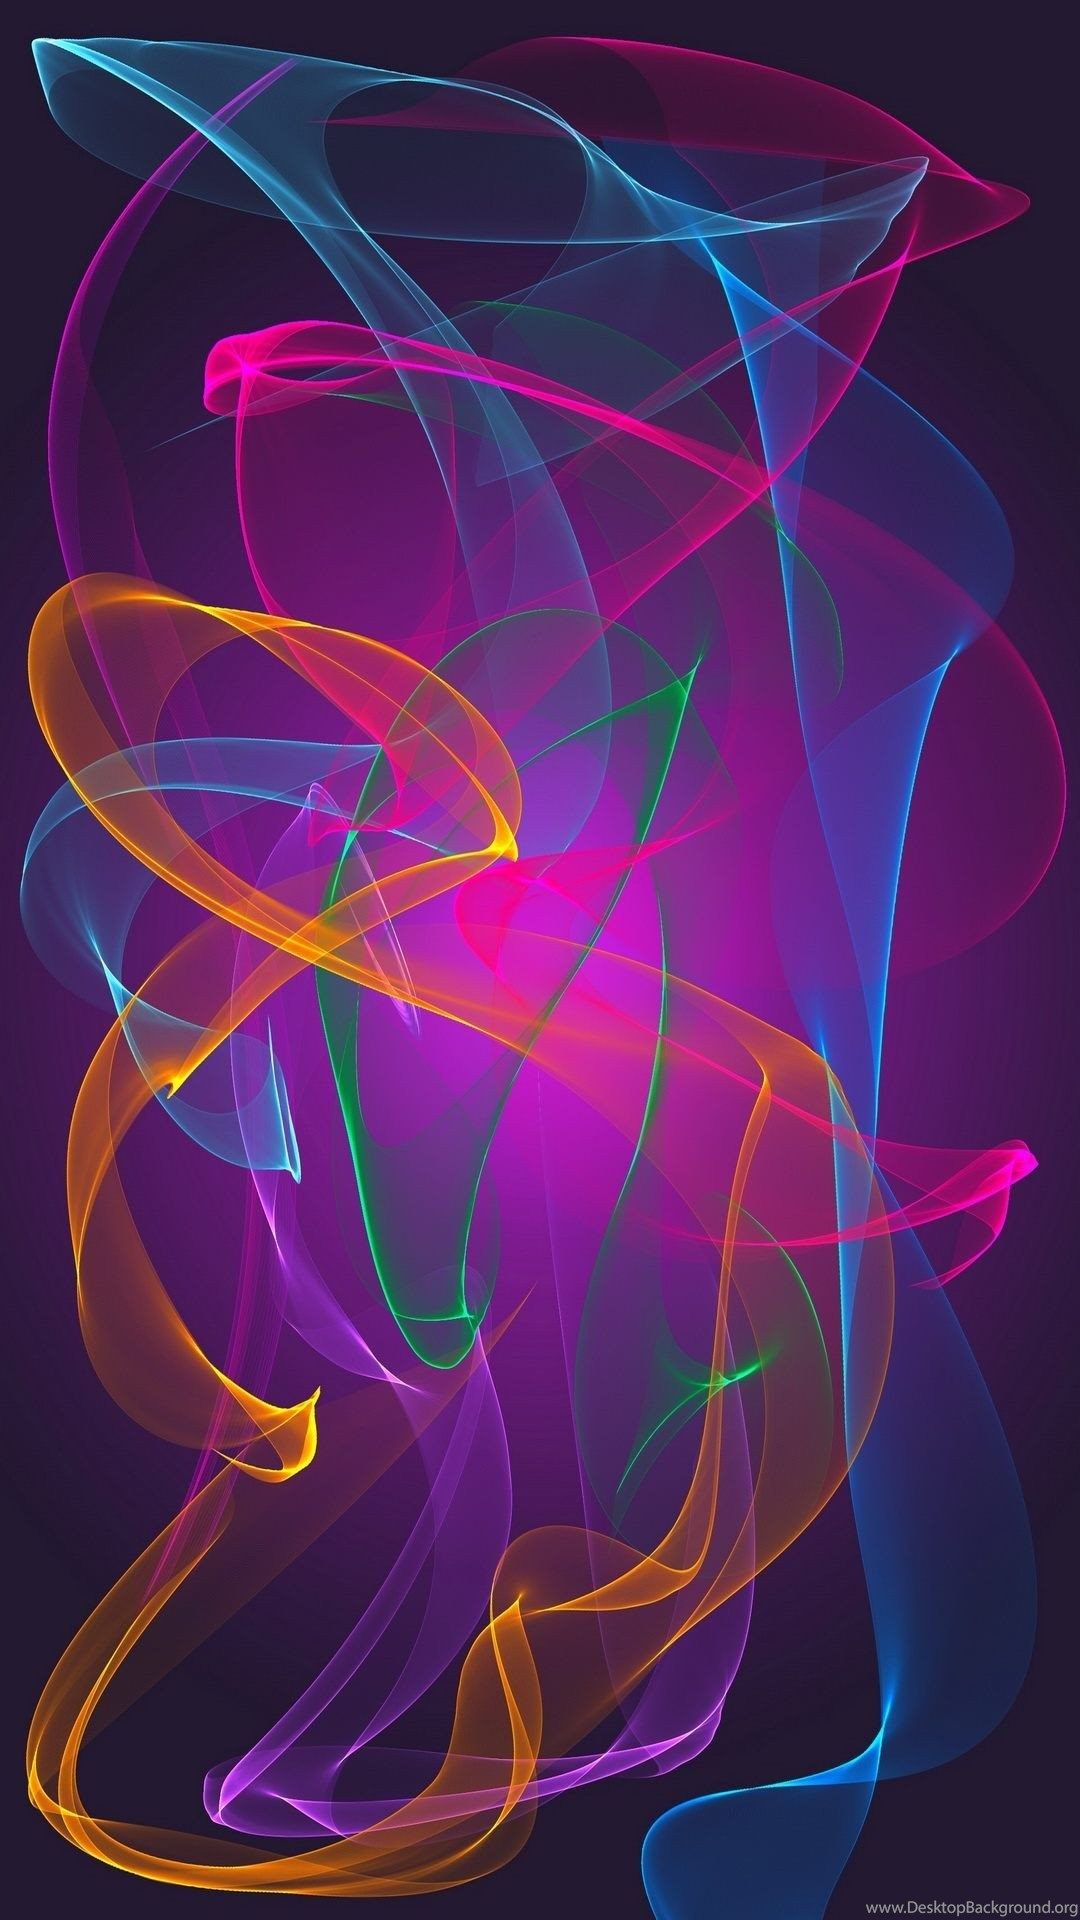 Abstract Neon Colors iPhone 6 Plus .desktopbackground.org